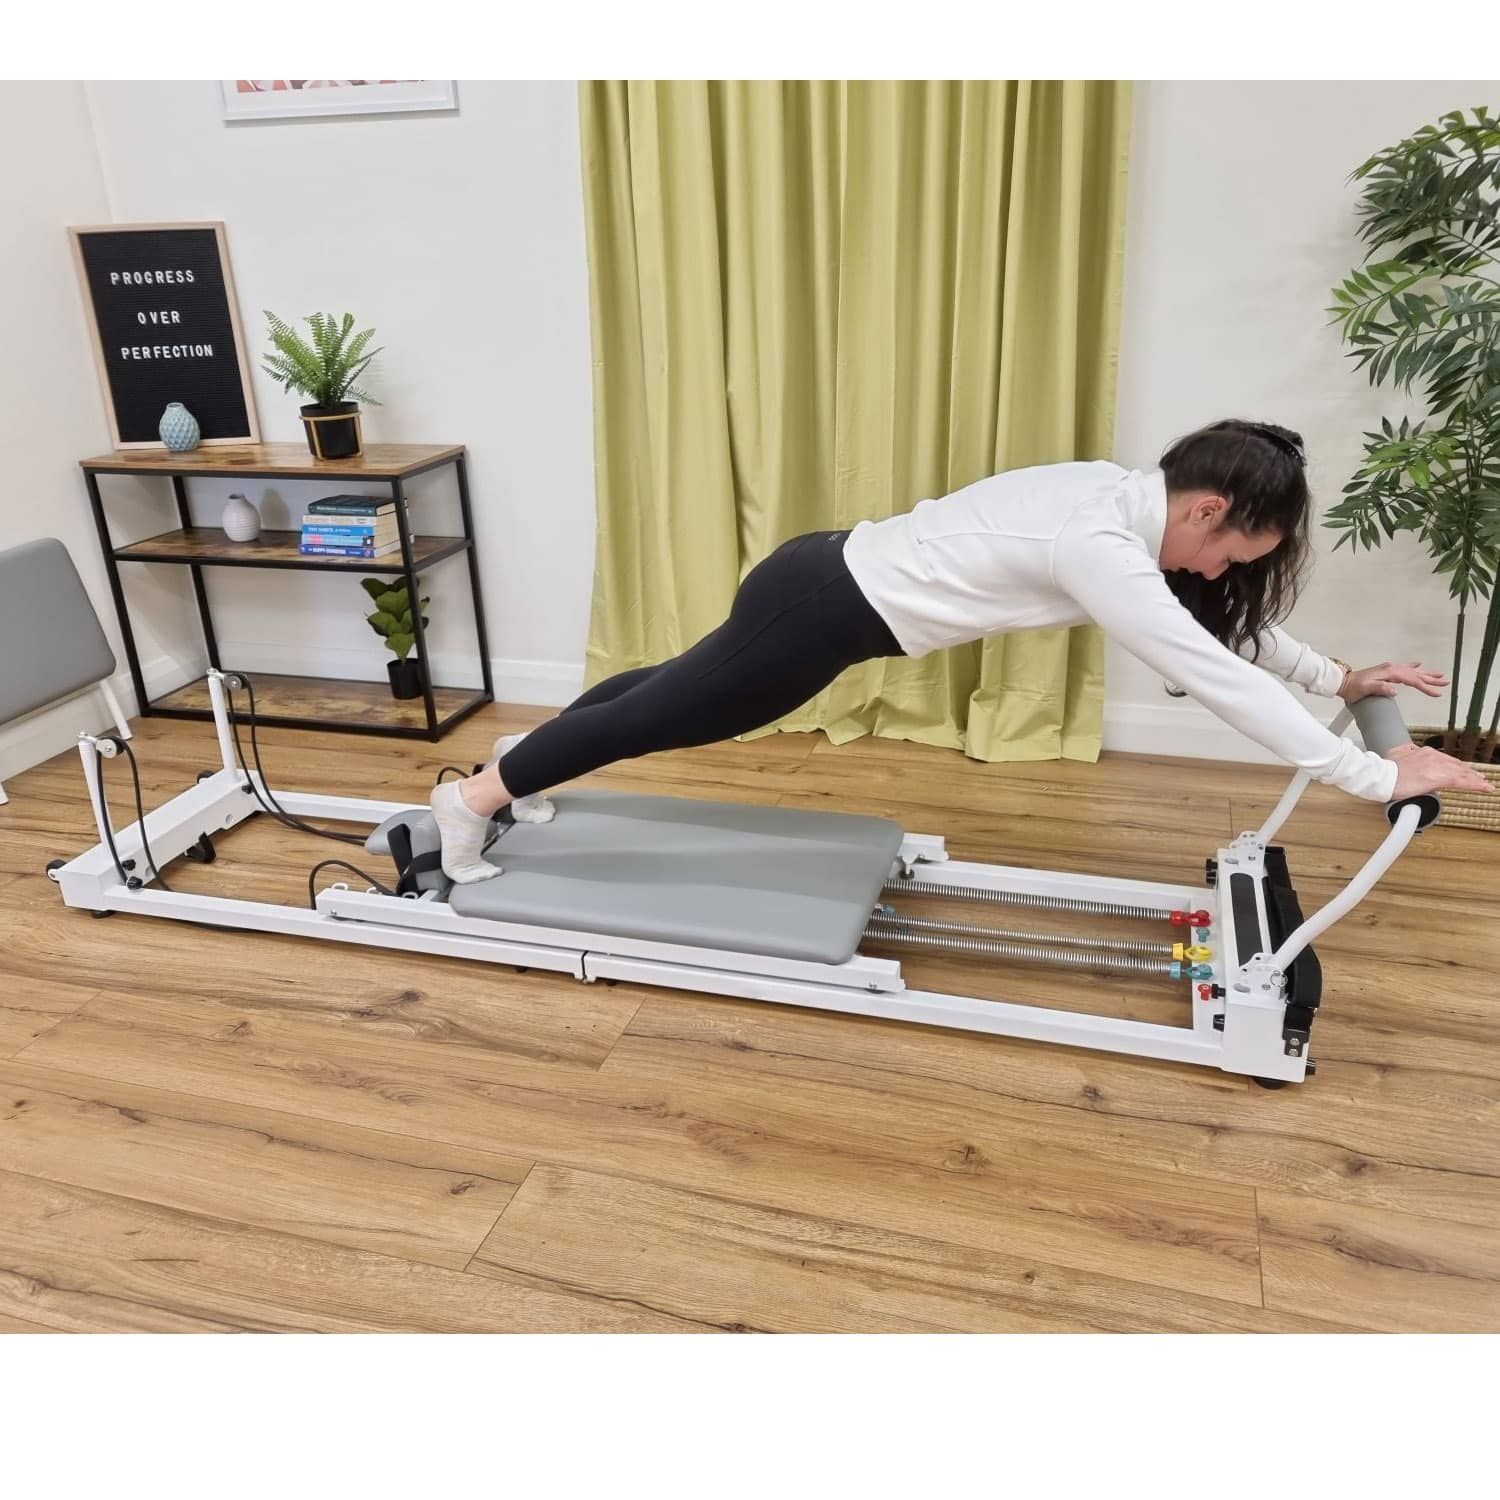 Pilates Reformer Machine Buy for a Home in Dubai - Ultimate